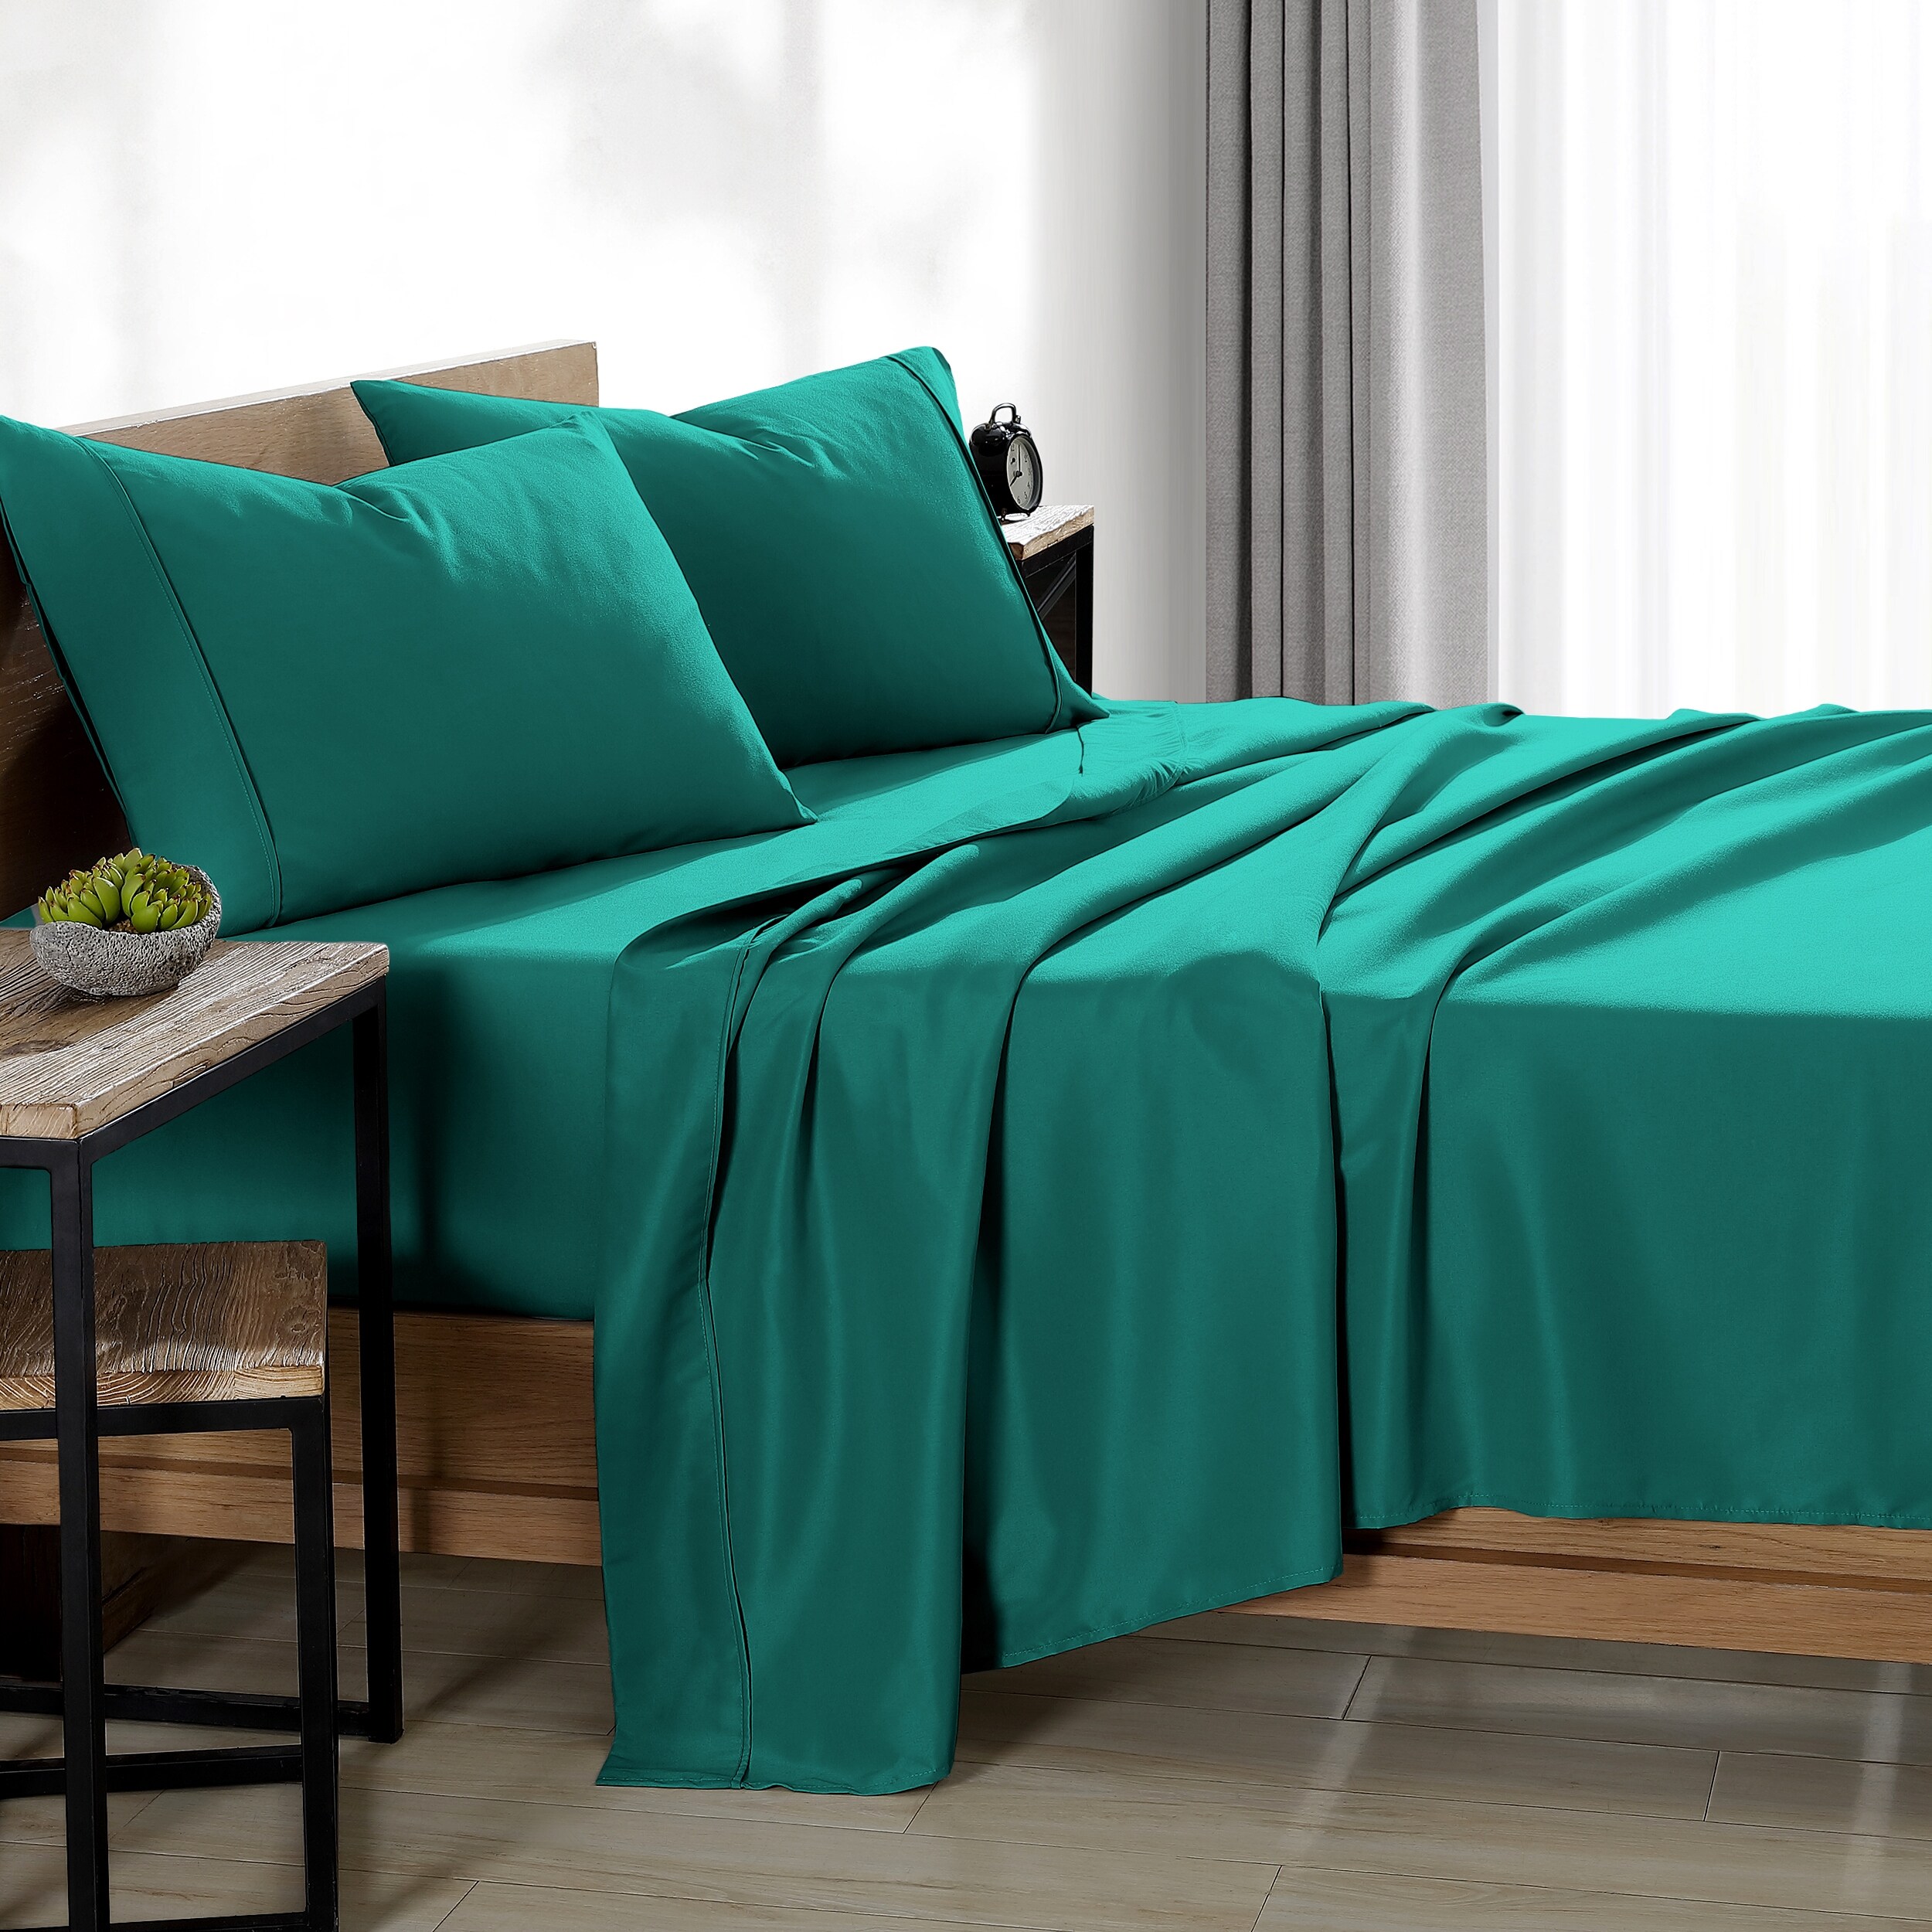 Details about   Bare Home Fitted Bottom Sheet Premium 1800 Ultra-Soft Wrinkle Resistant Microf